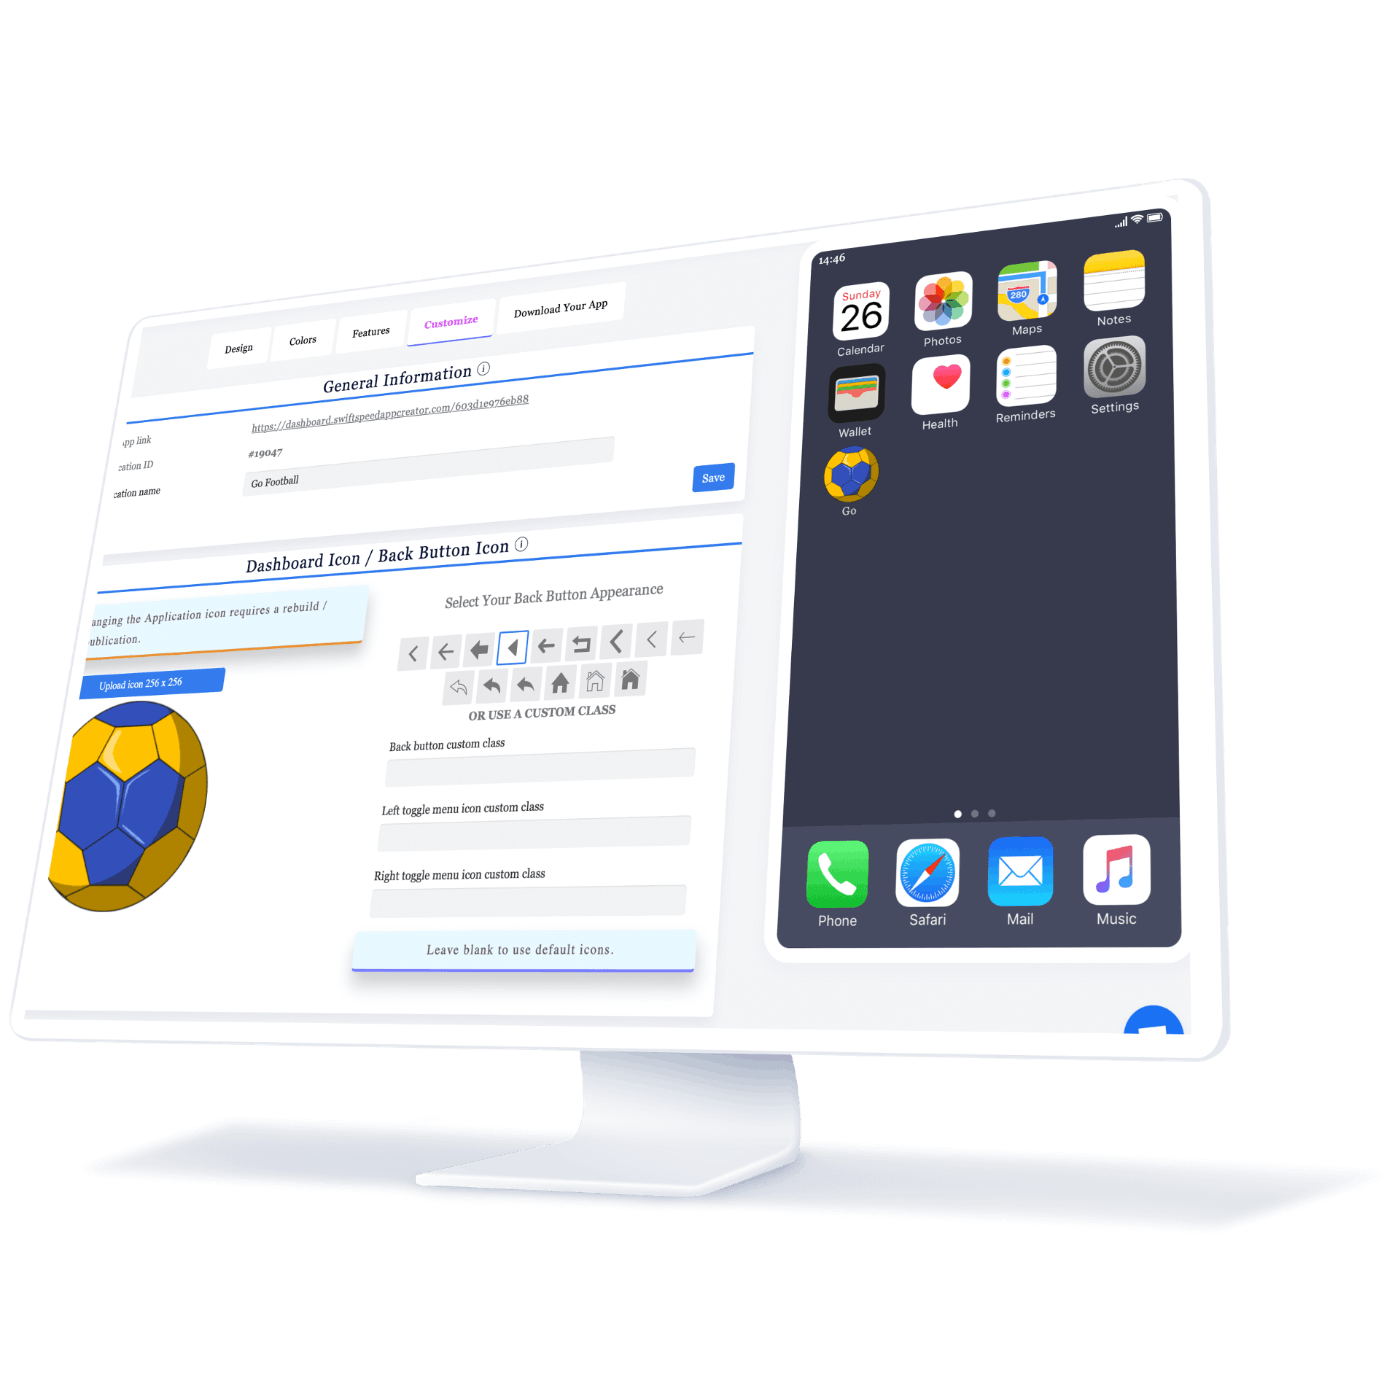 Swiftspeed: Revolutionalizing App Development With Their New AI App Builder: How It Works